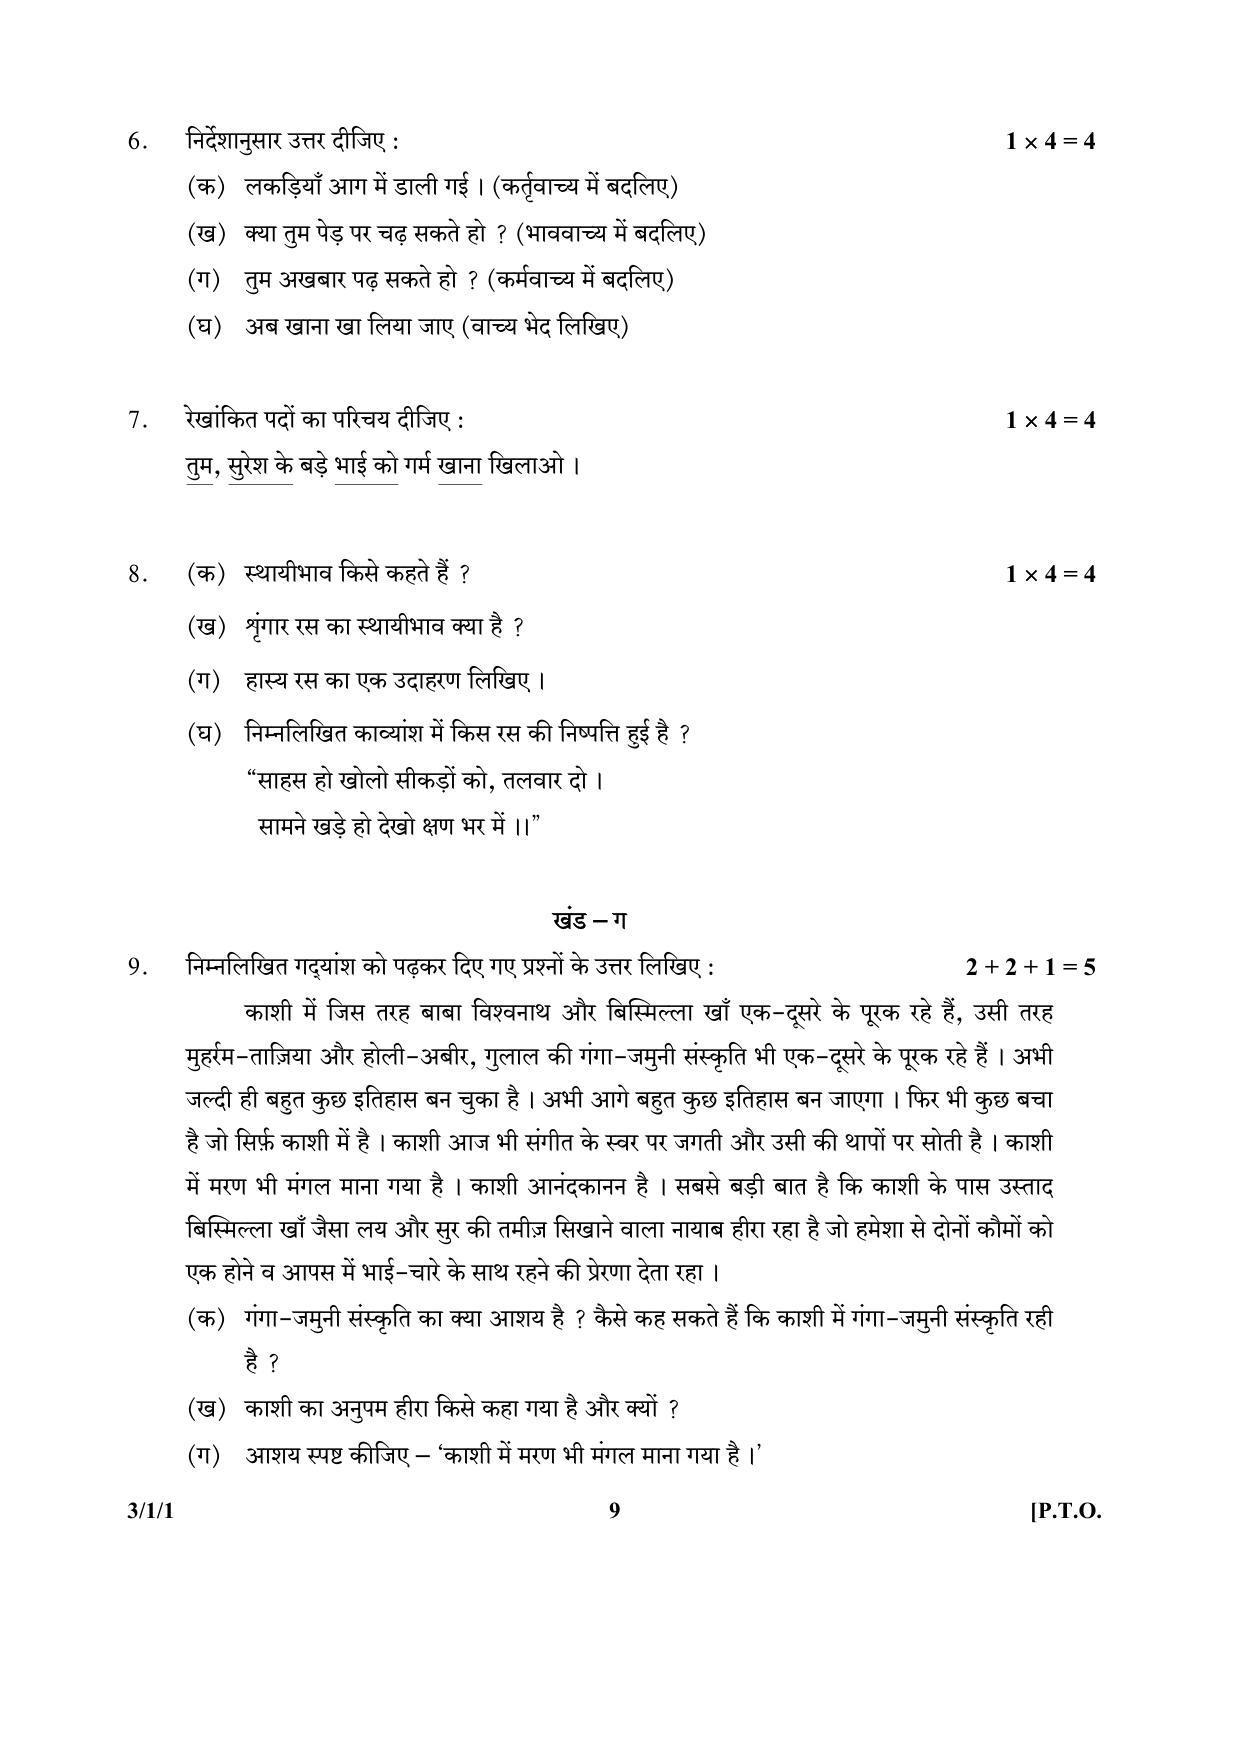 CBSE Class 10 3-1-1 (Hindi) 2017-comptt Question Paper - Page 9